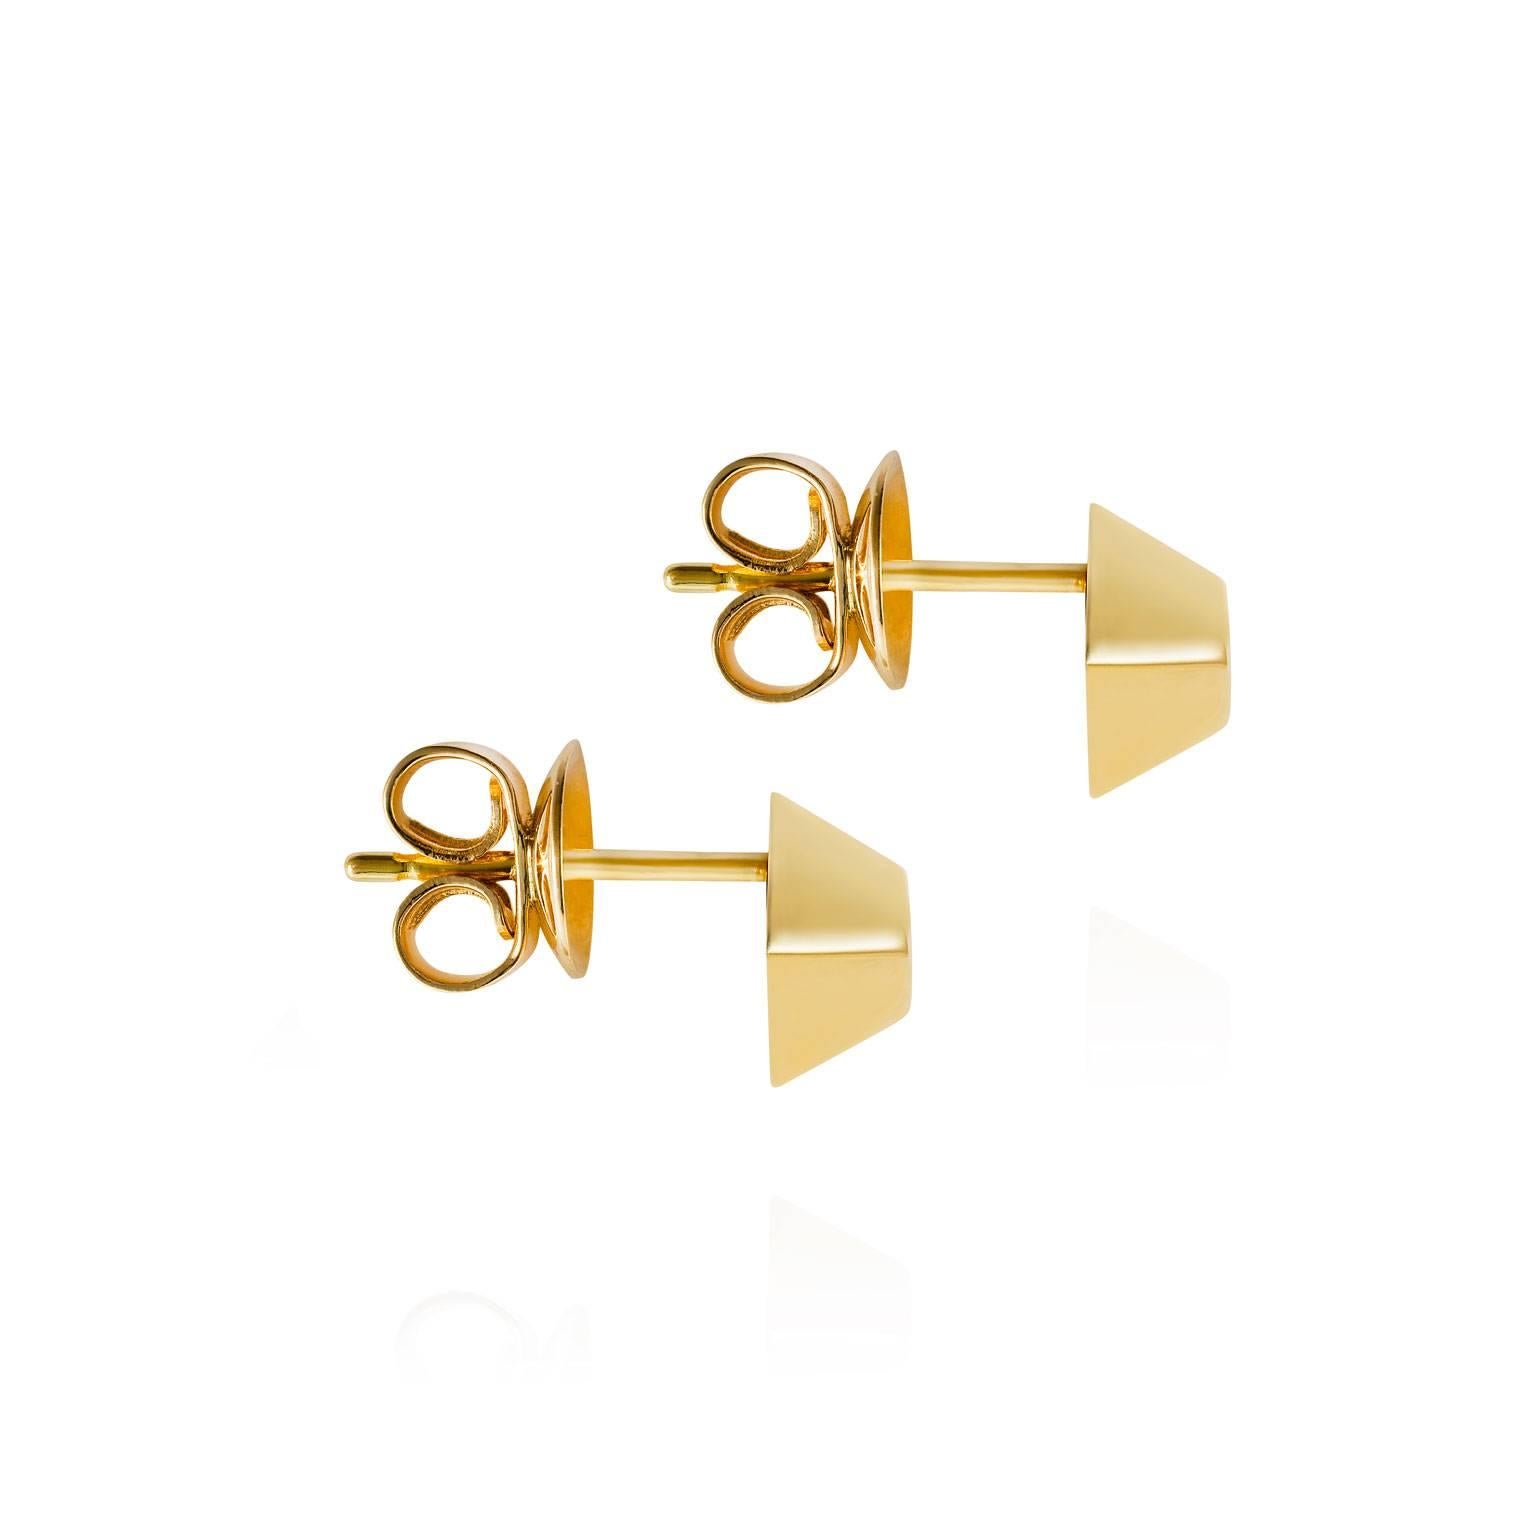 Perfect for everyday wear, these geometric gold pyramid studs will add a sleek and minimal aesthetic to your look.

Crafted in 18k yellow gold they come in a highly polished finish.
Measures: 7.5 x 7.5mm
Handmade in London, England.
